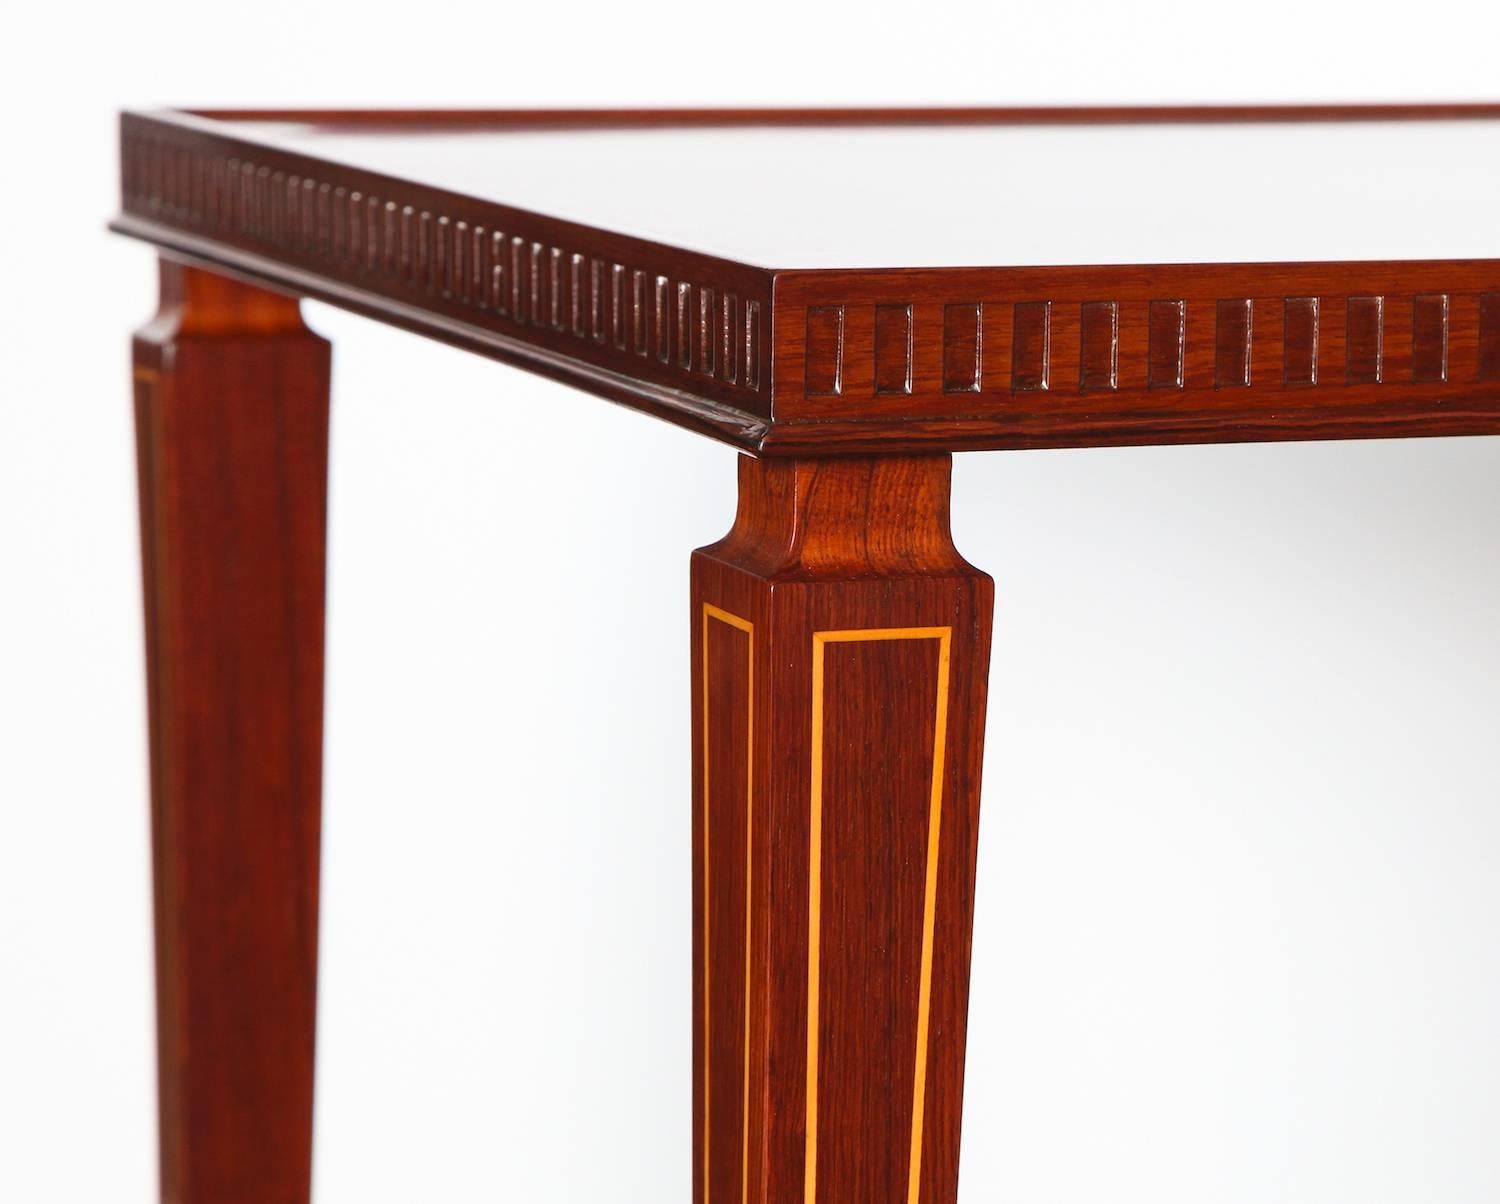 Elegant pair of side tables by Paolo Buffa.  Great pair of rosewood tables, with shaped and tapered legs. Carved details around the outside edge of the top and inlaid light wood along the face of the legs. Beautiful brass cuffs and feet. This pair